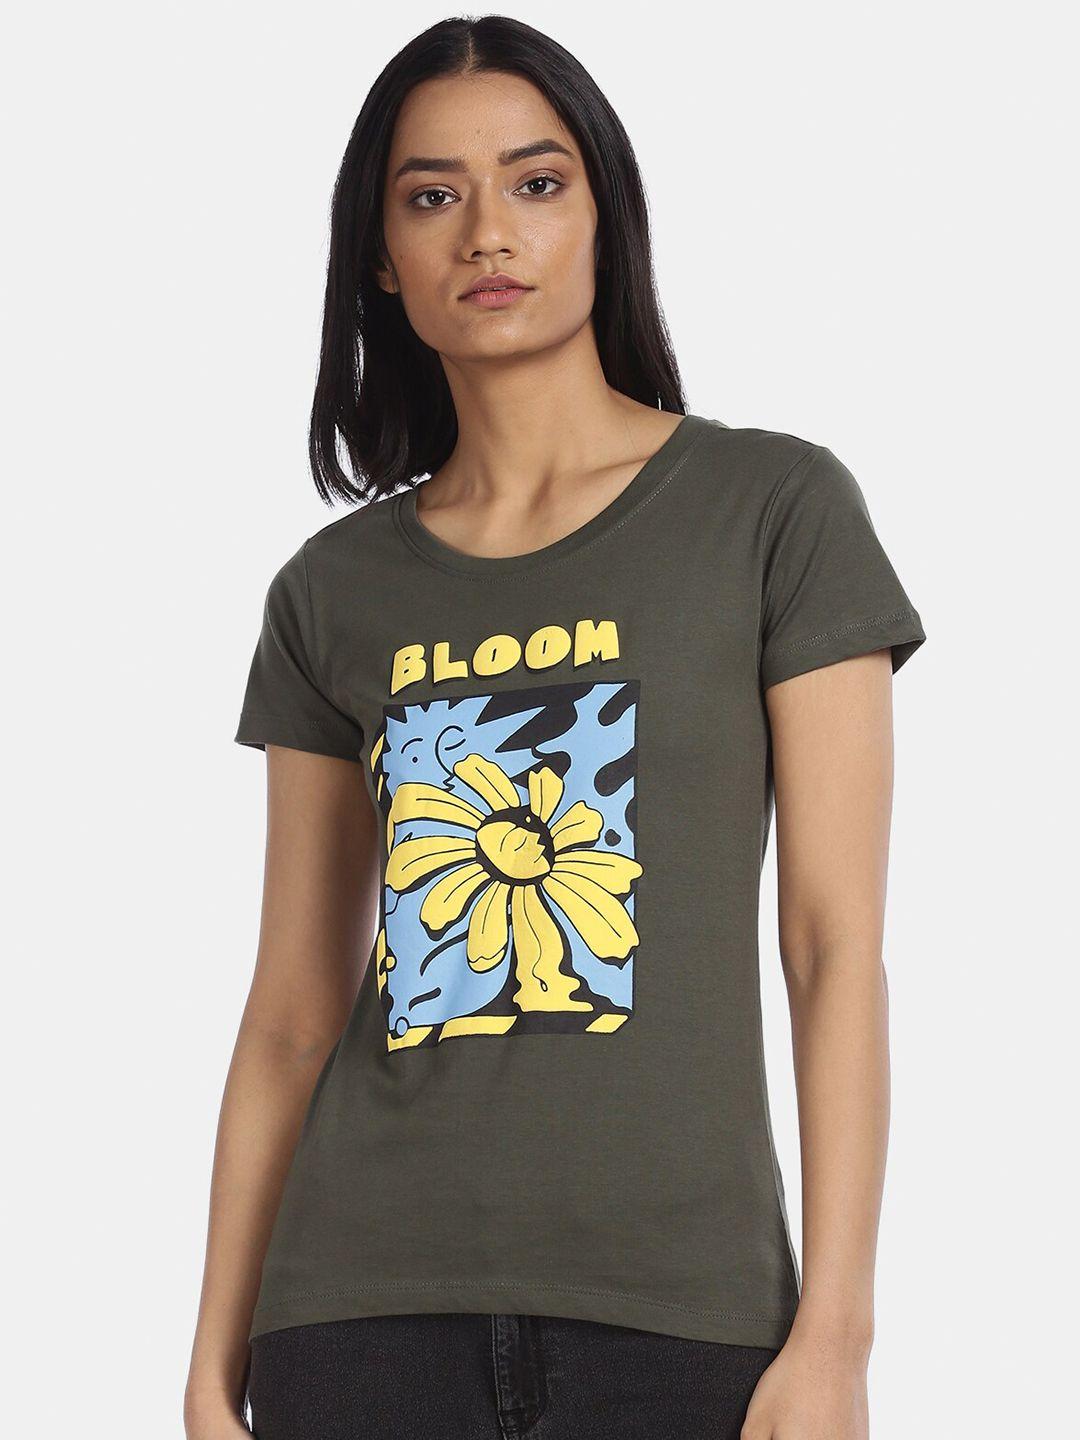 sugr-women-olive-green-&-blue-floral-printed-t-shirt